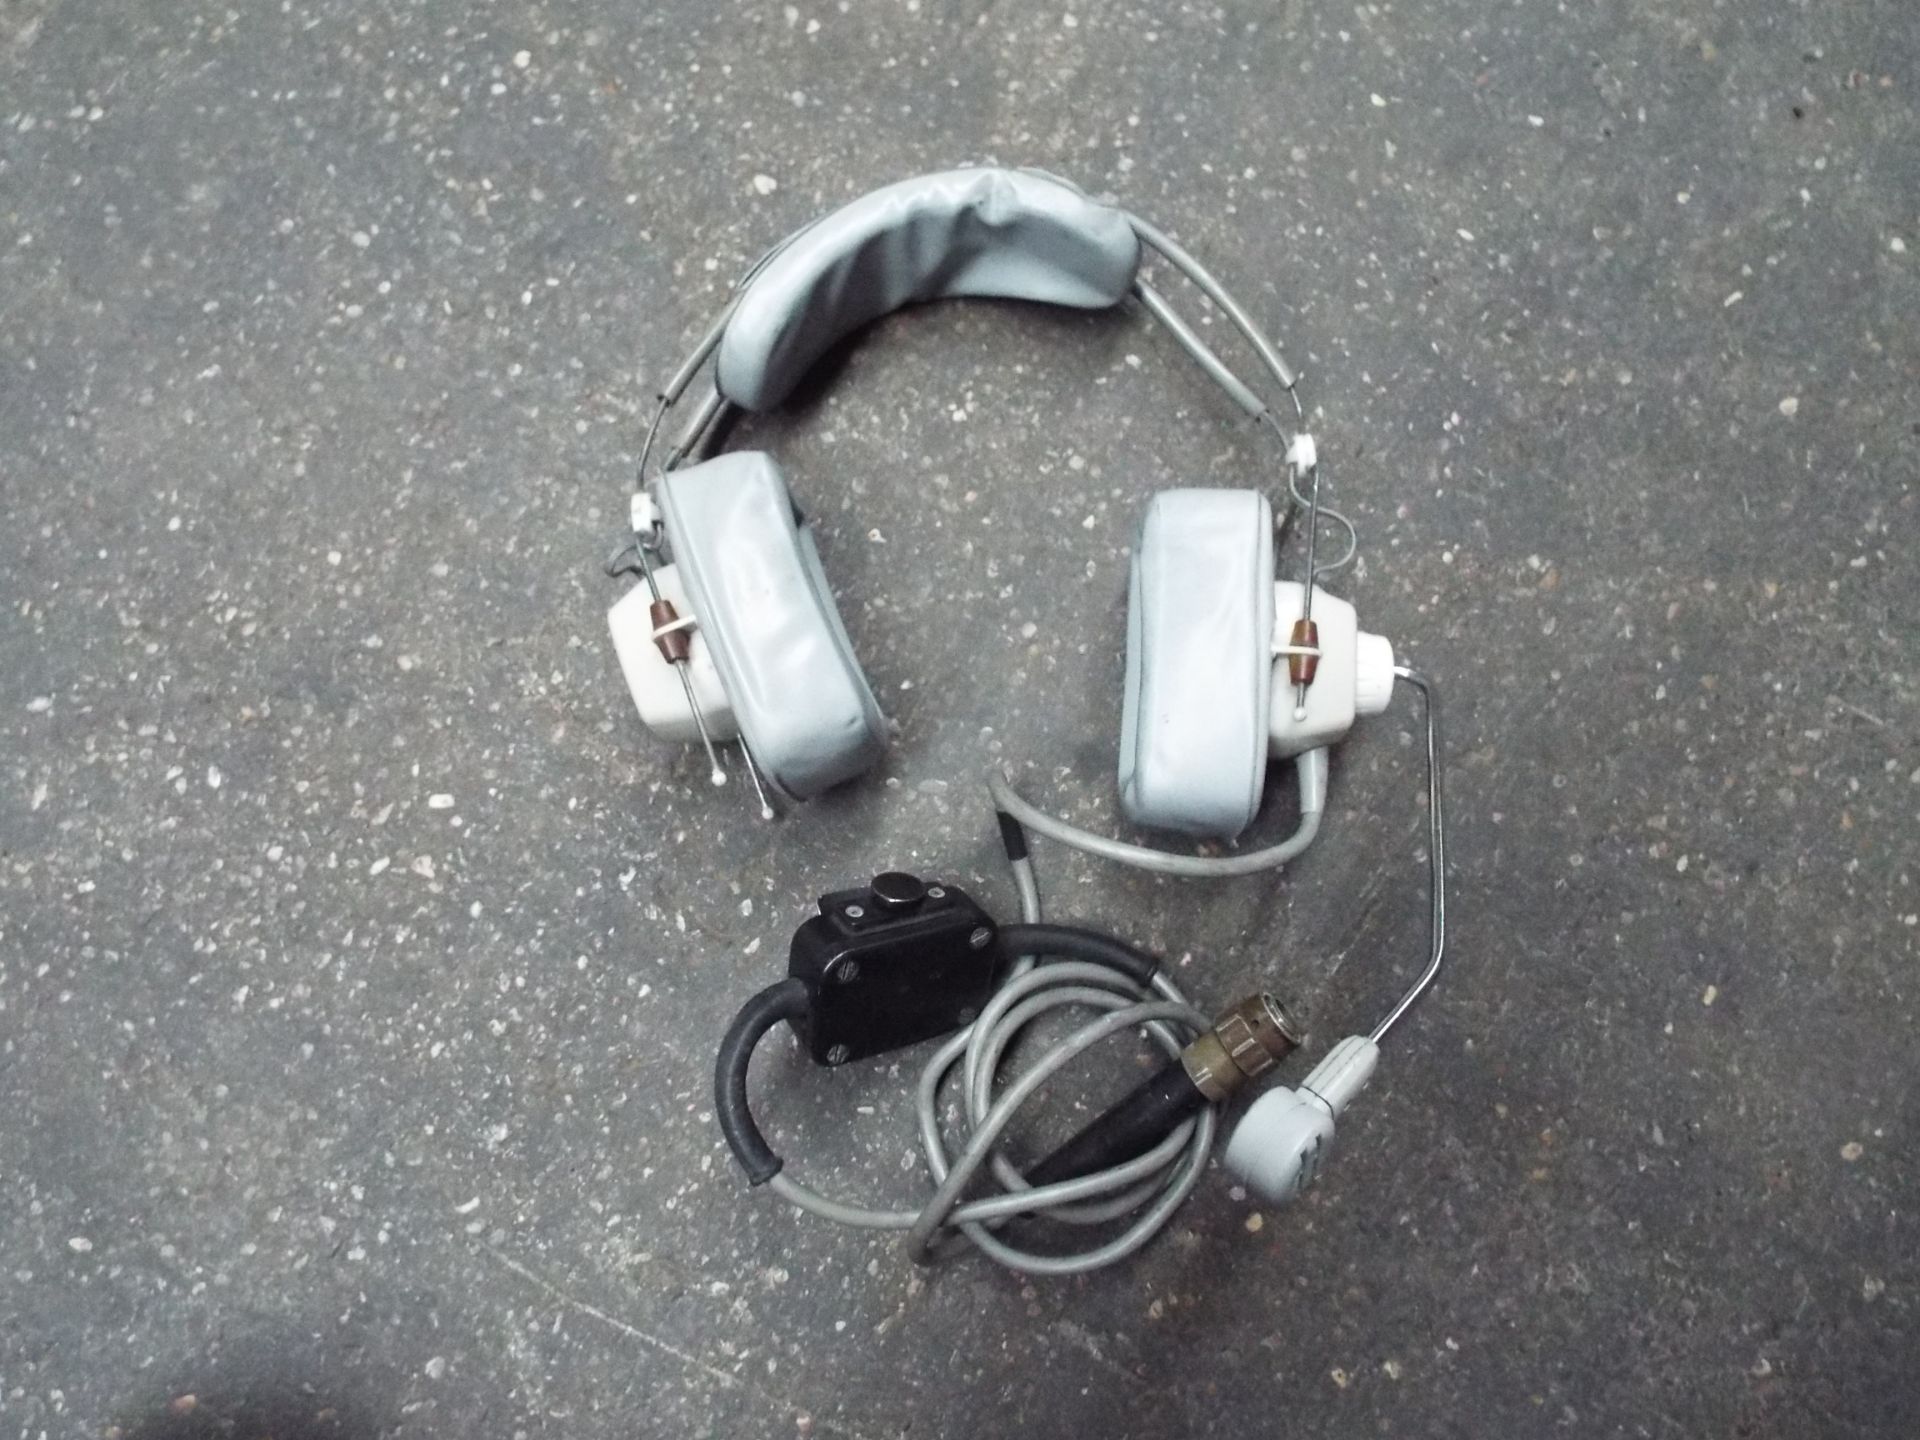 11 x Amplivox Astrolite Headsets as used by Air Traffic Control and Pilots - Bild 2 aus 5